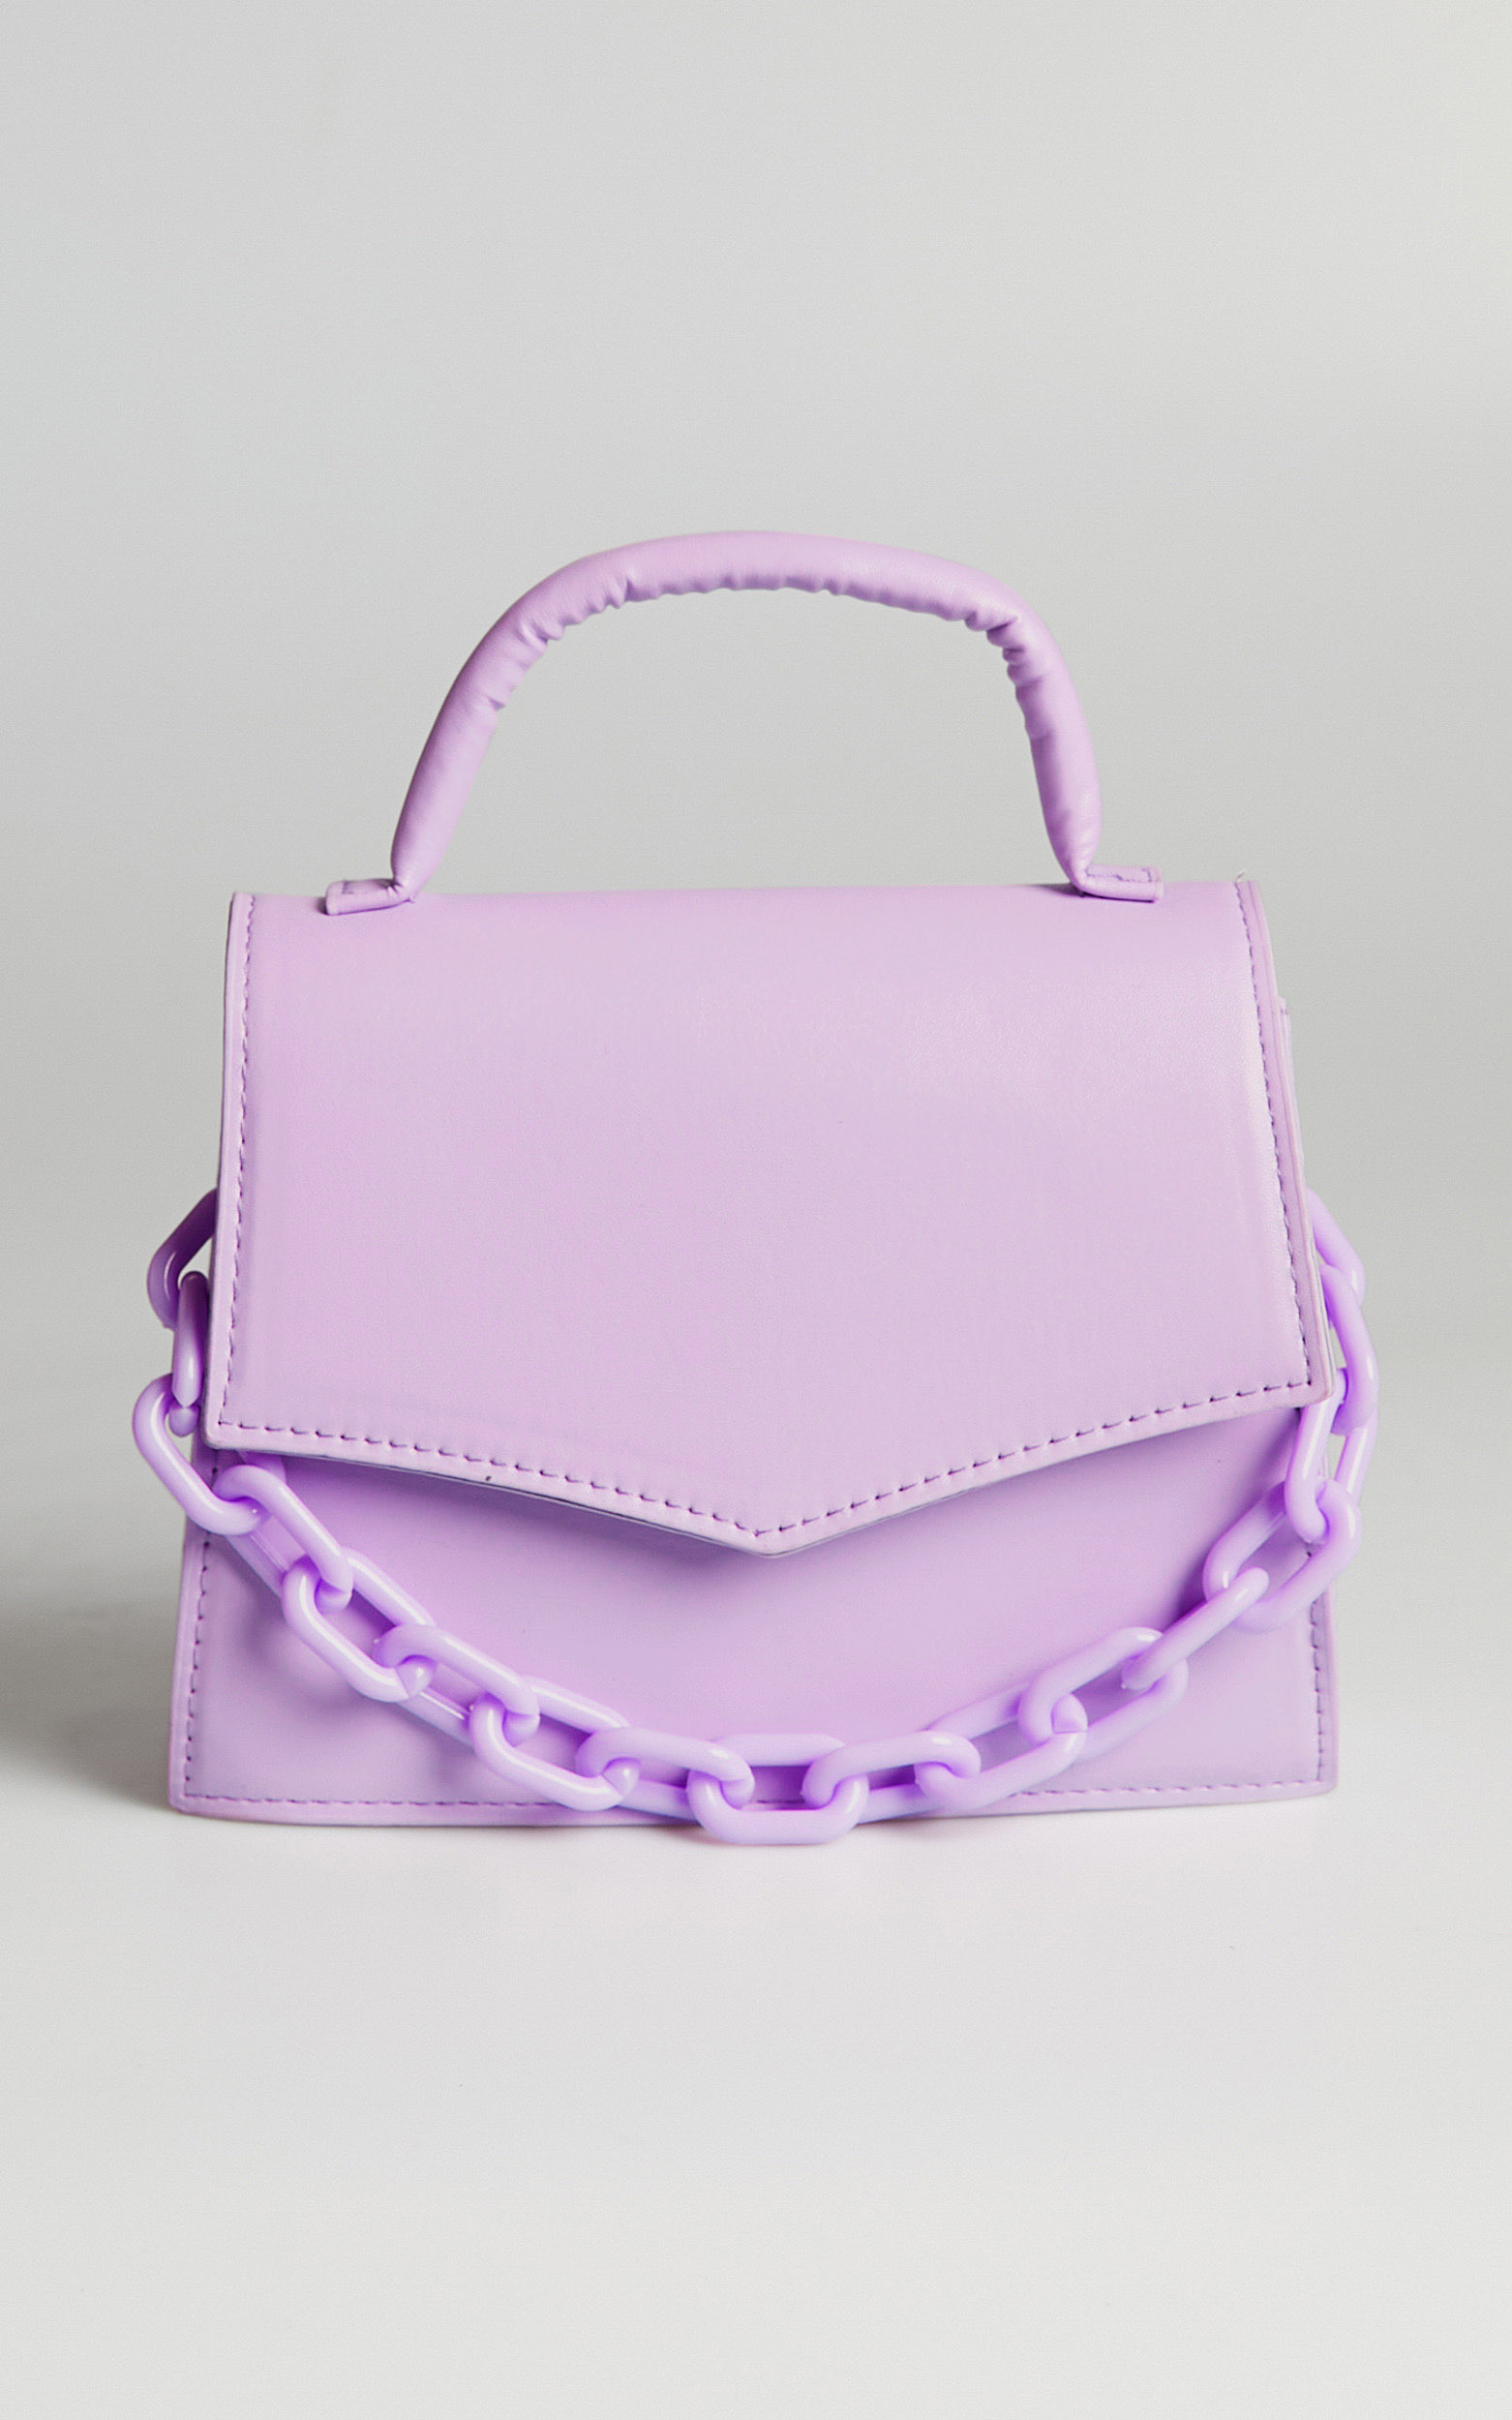 Rimona Bag in Lilac - NoSize, PRP1, hi-res image number null